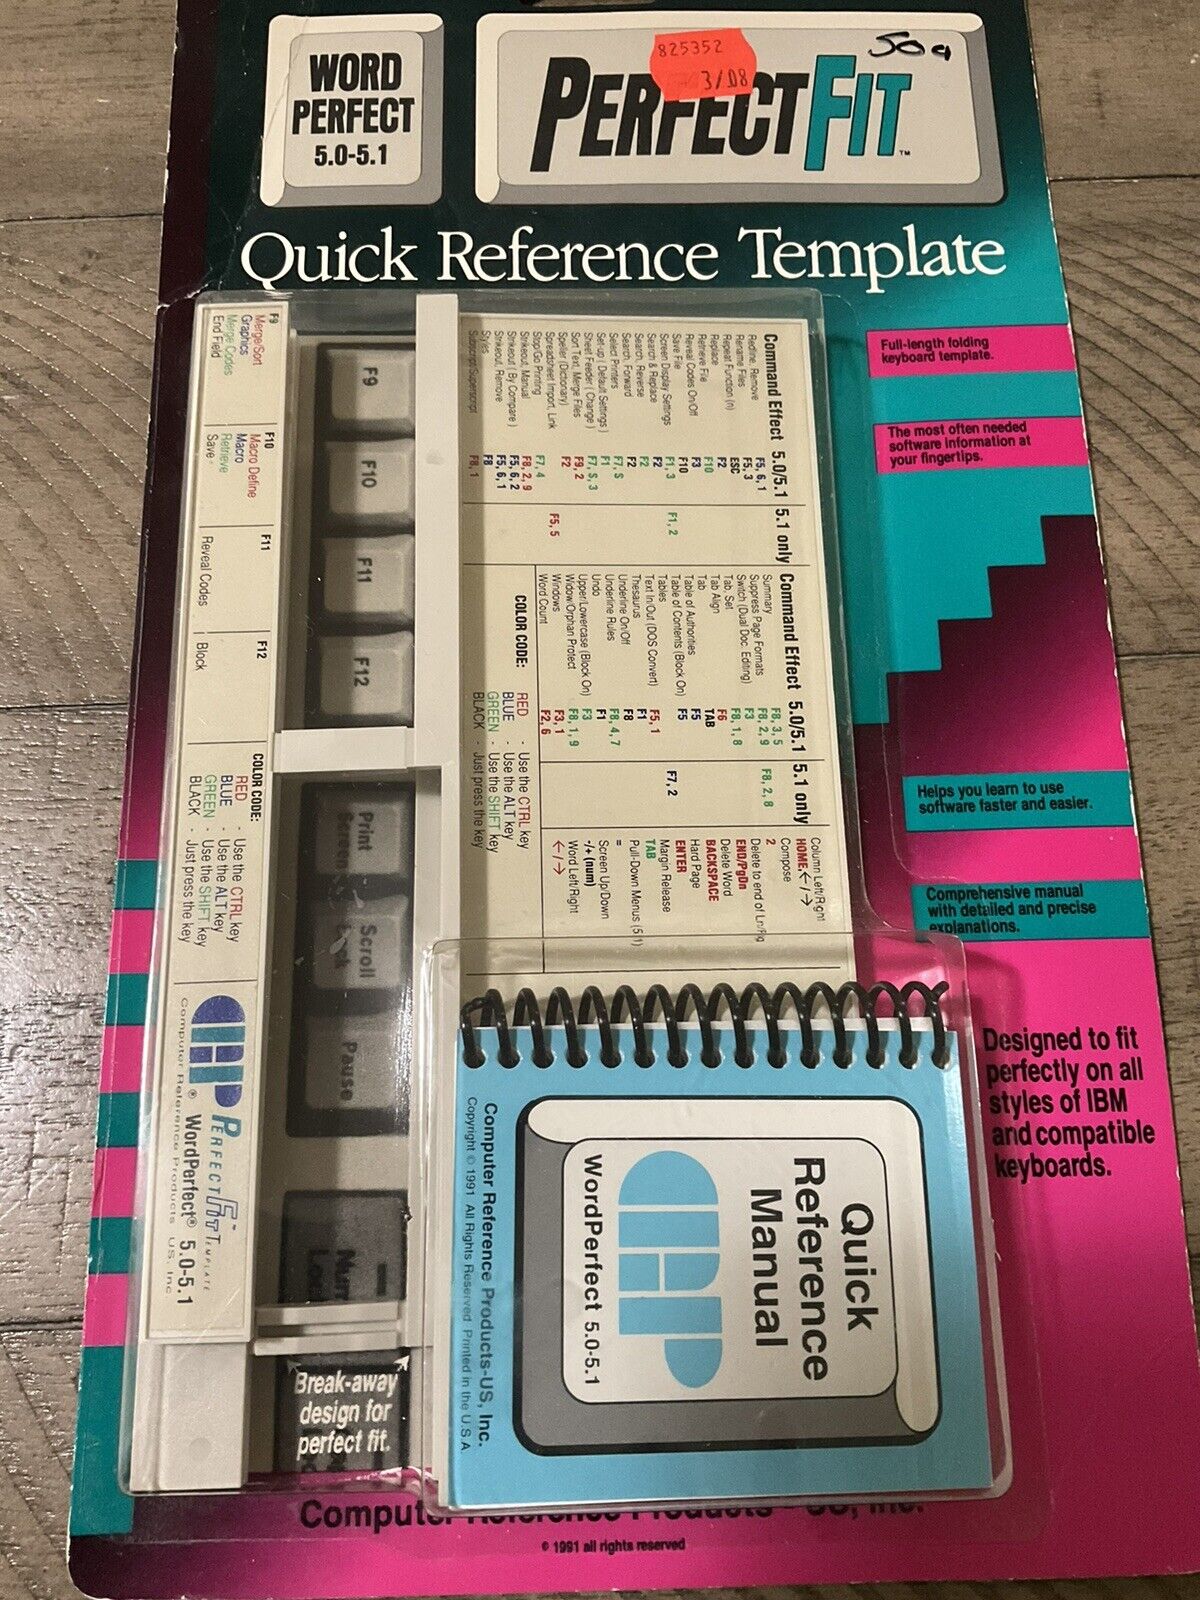 VINTAGE NOS 1991 WORD PERFECT 5.0-5.1 QUICK REFERENCE TEMPLATE FOR IBM & OTHERS